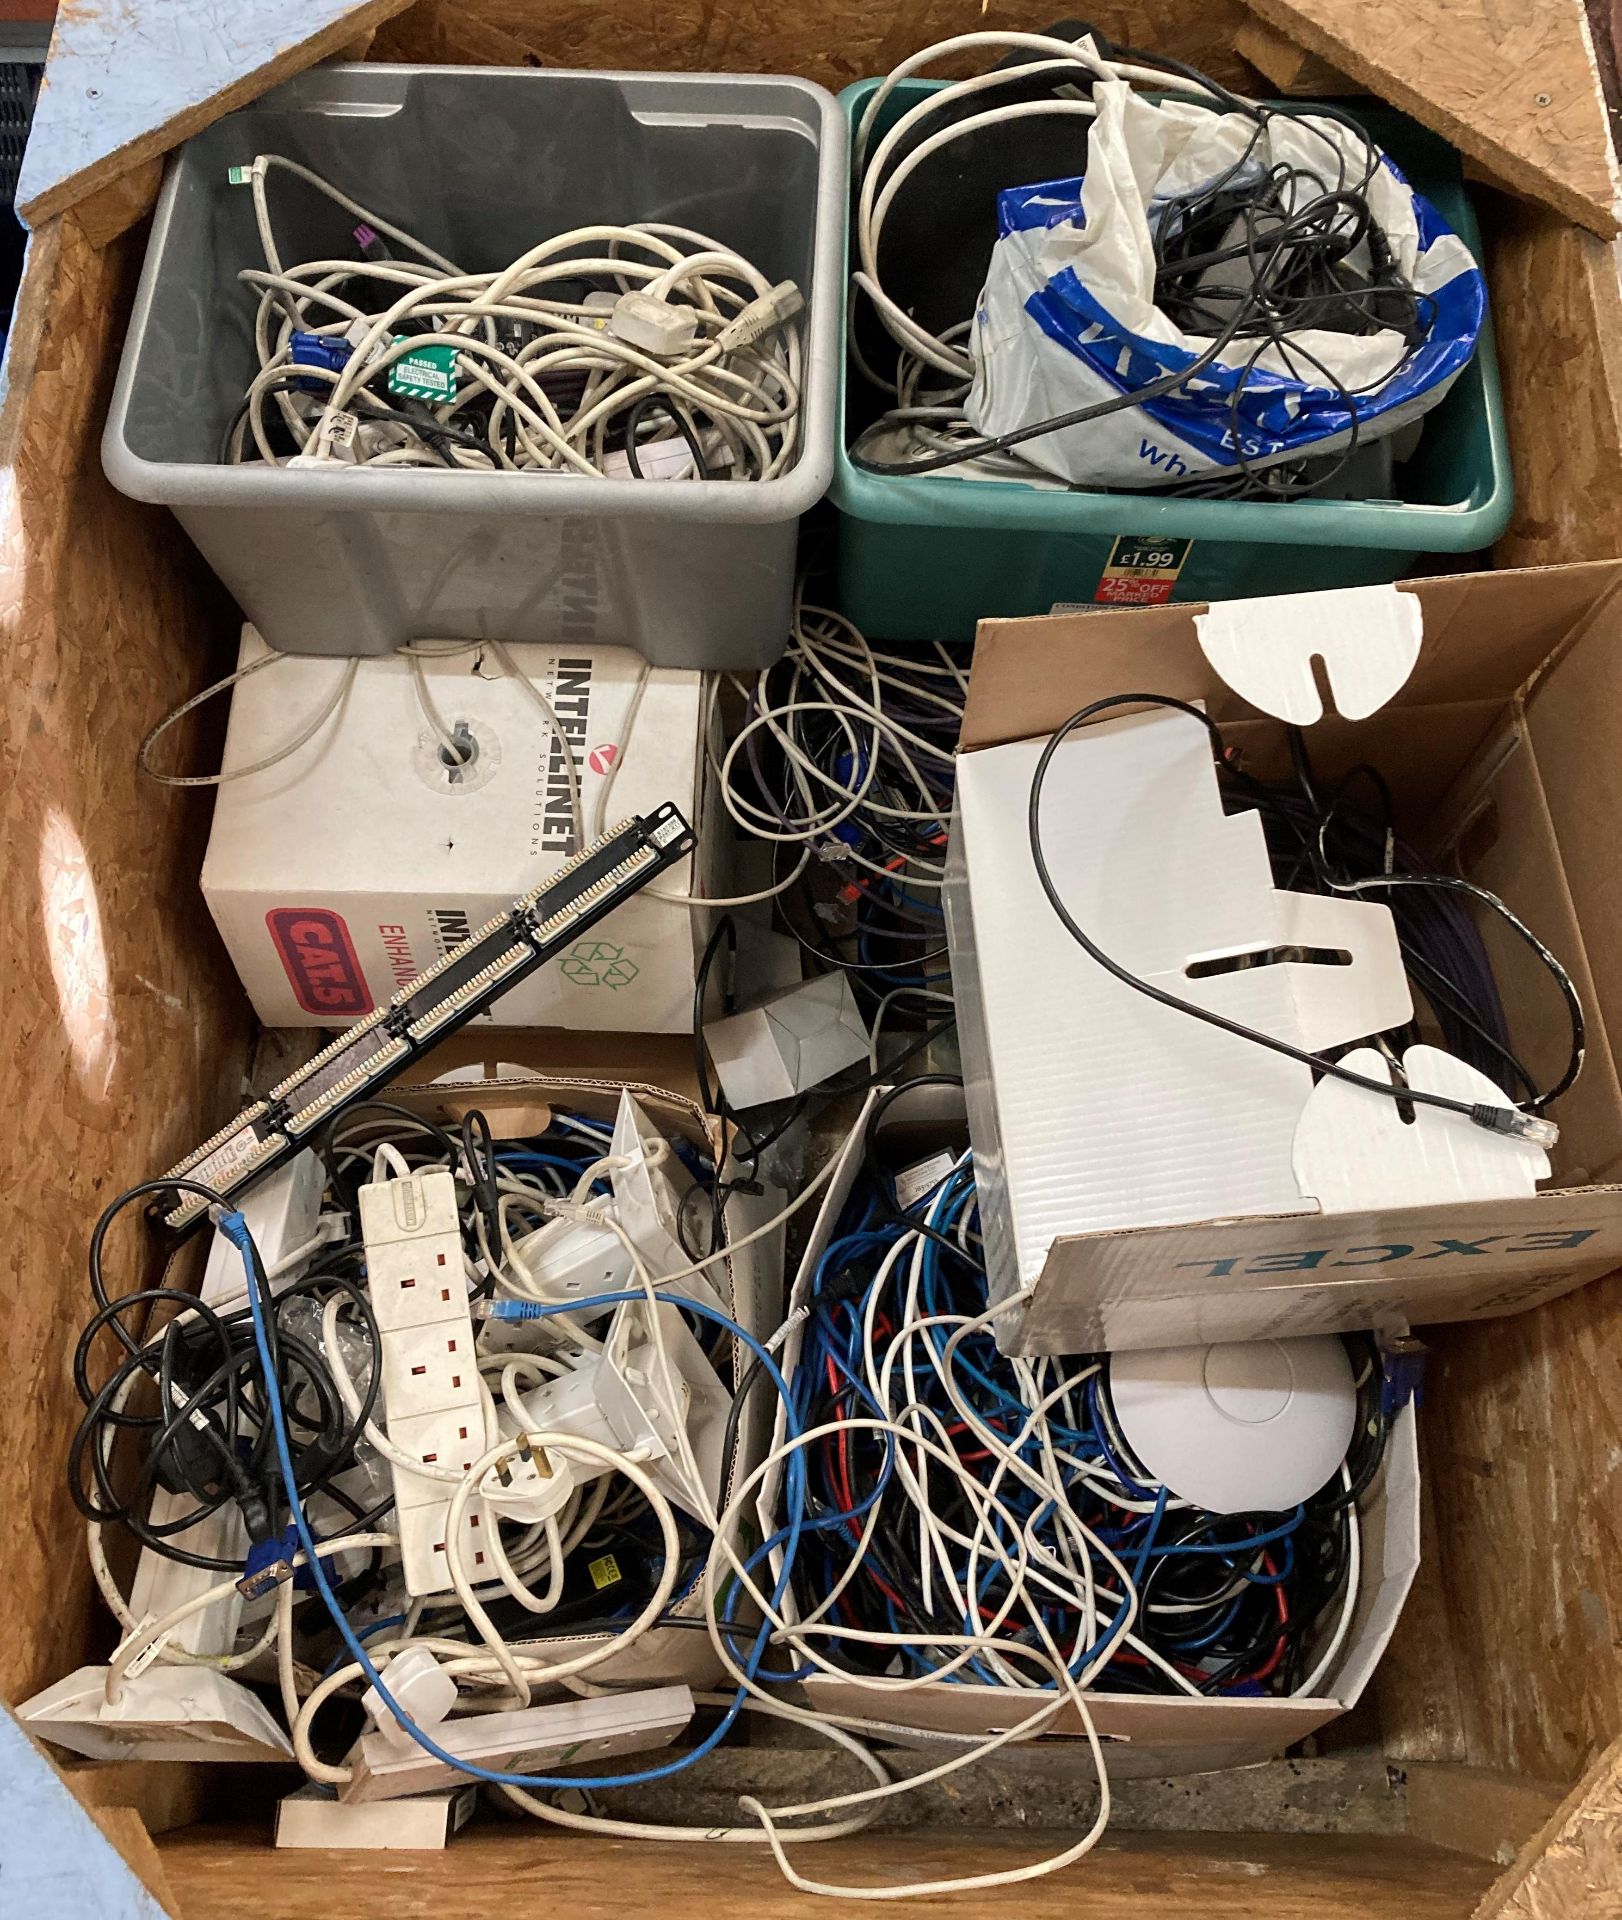 Contents to crate - assorted extension leads, power cables, cat five,